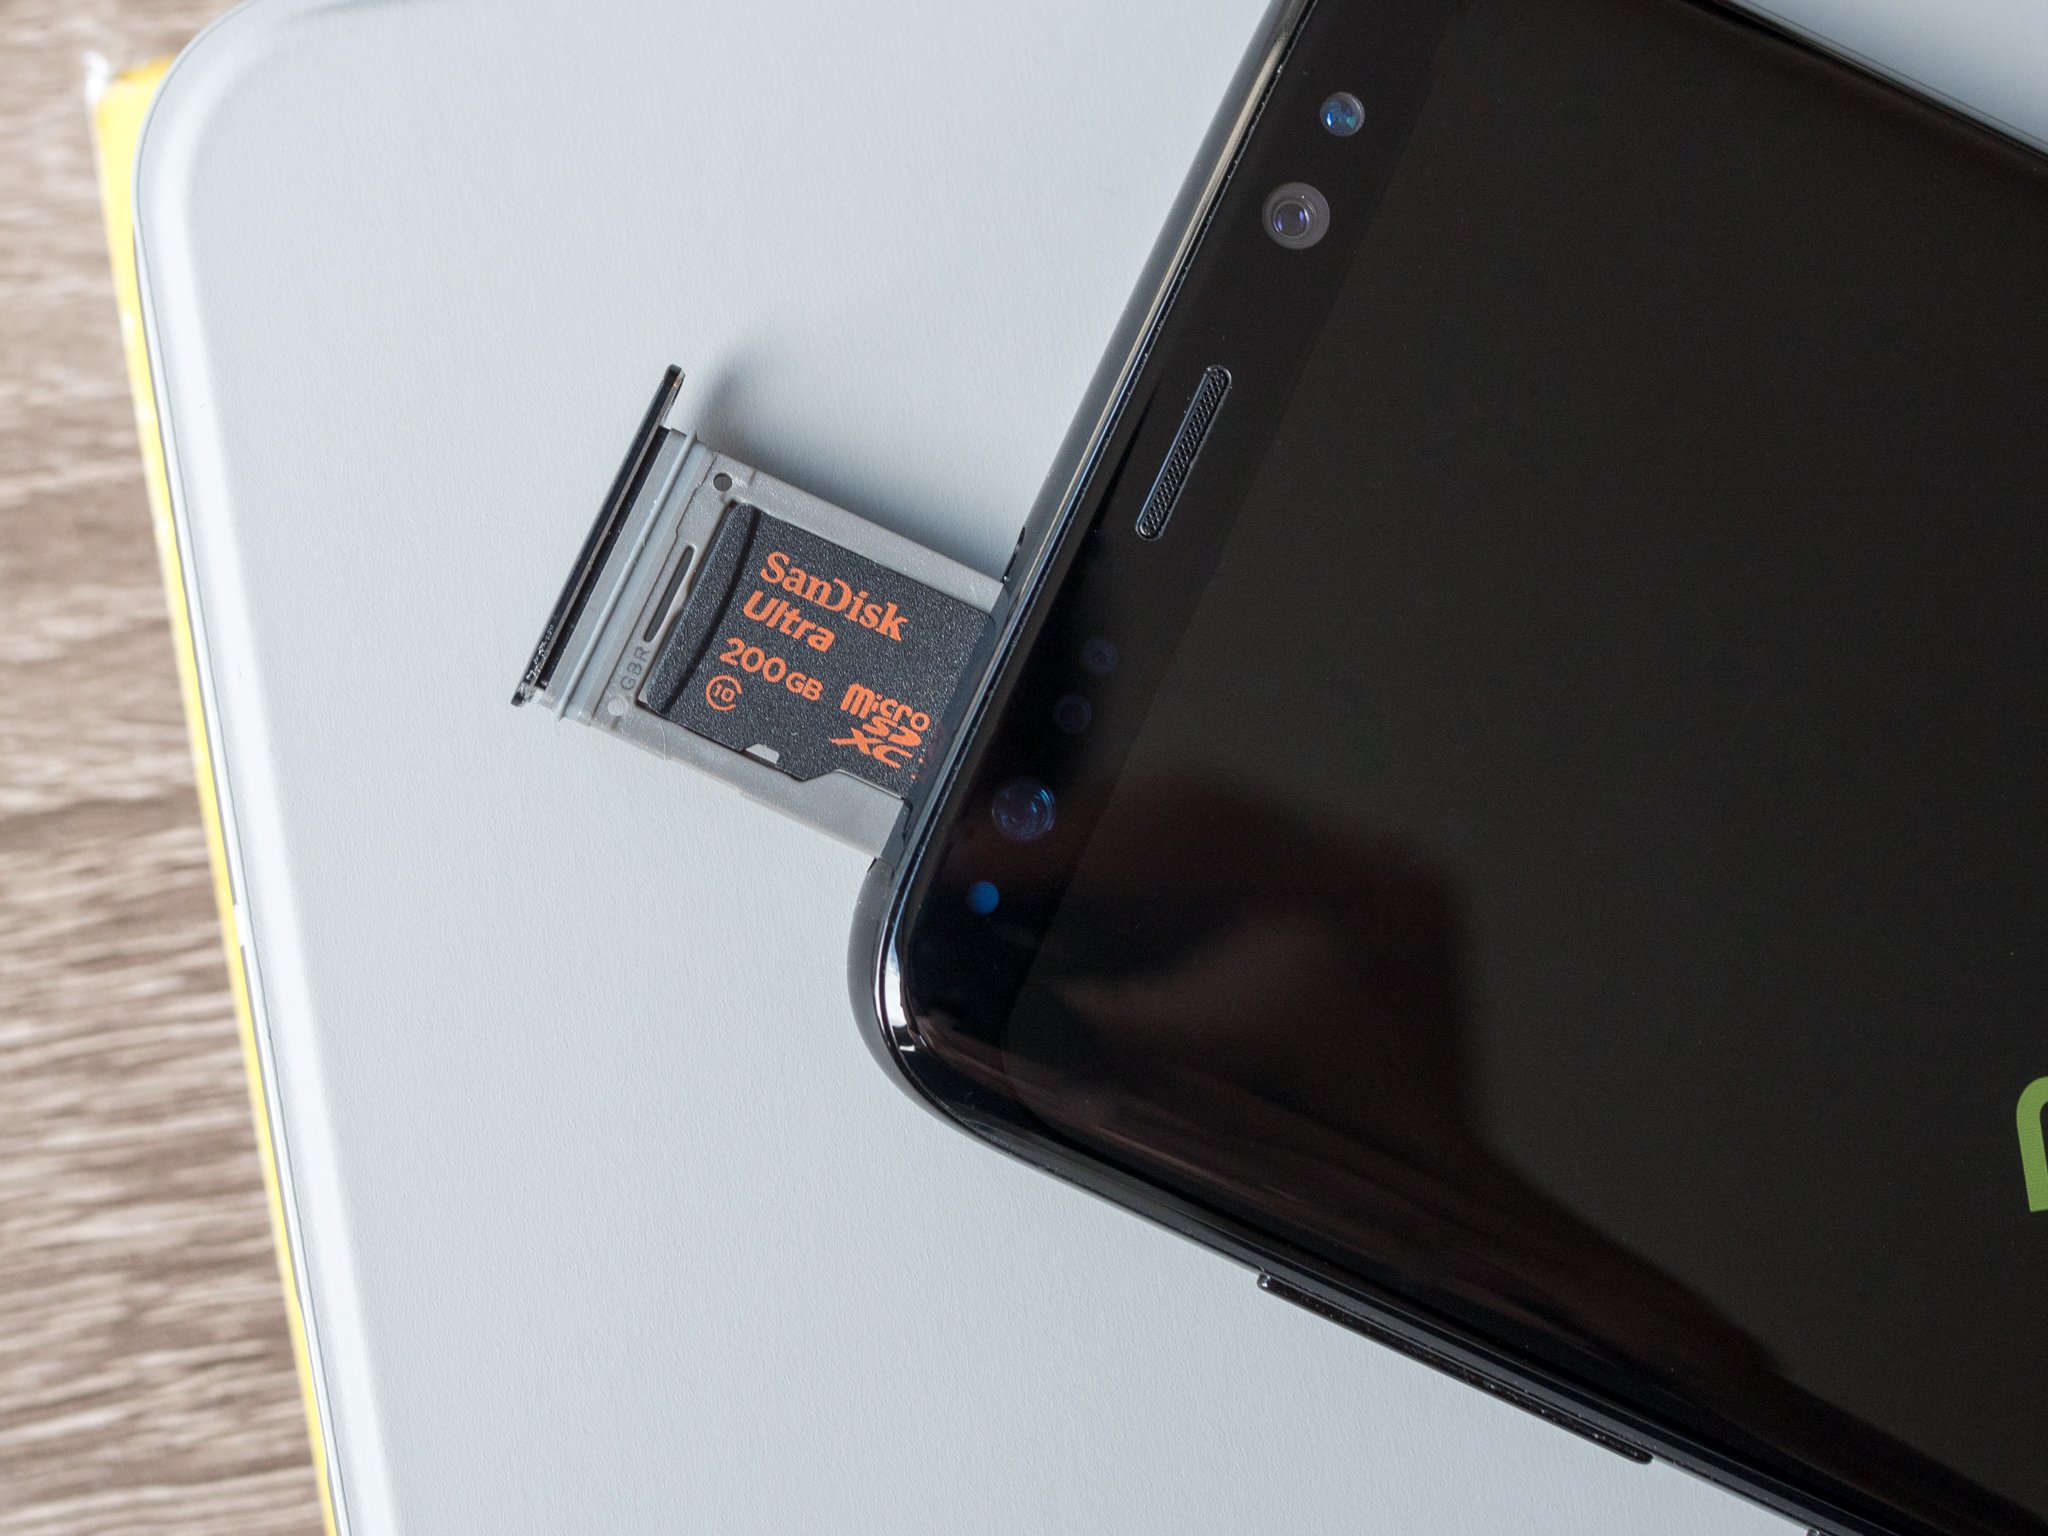 Top things you need to know about the Samsung Galaxy S8's SD card slot